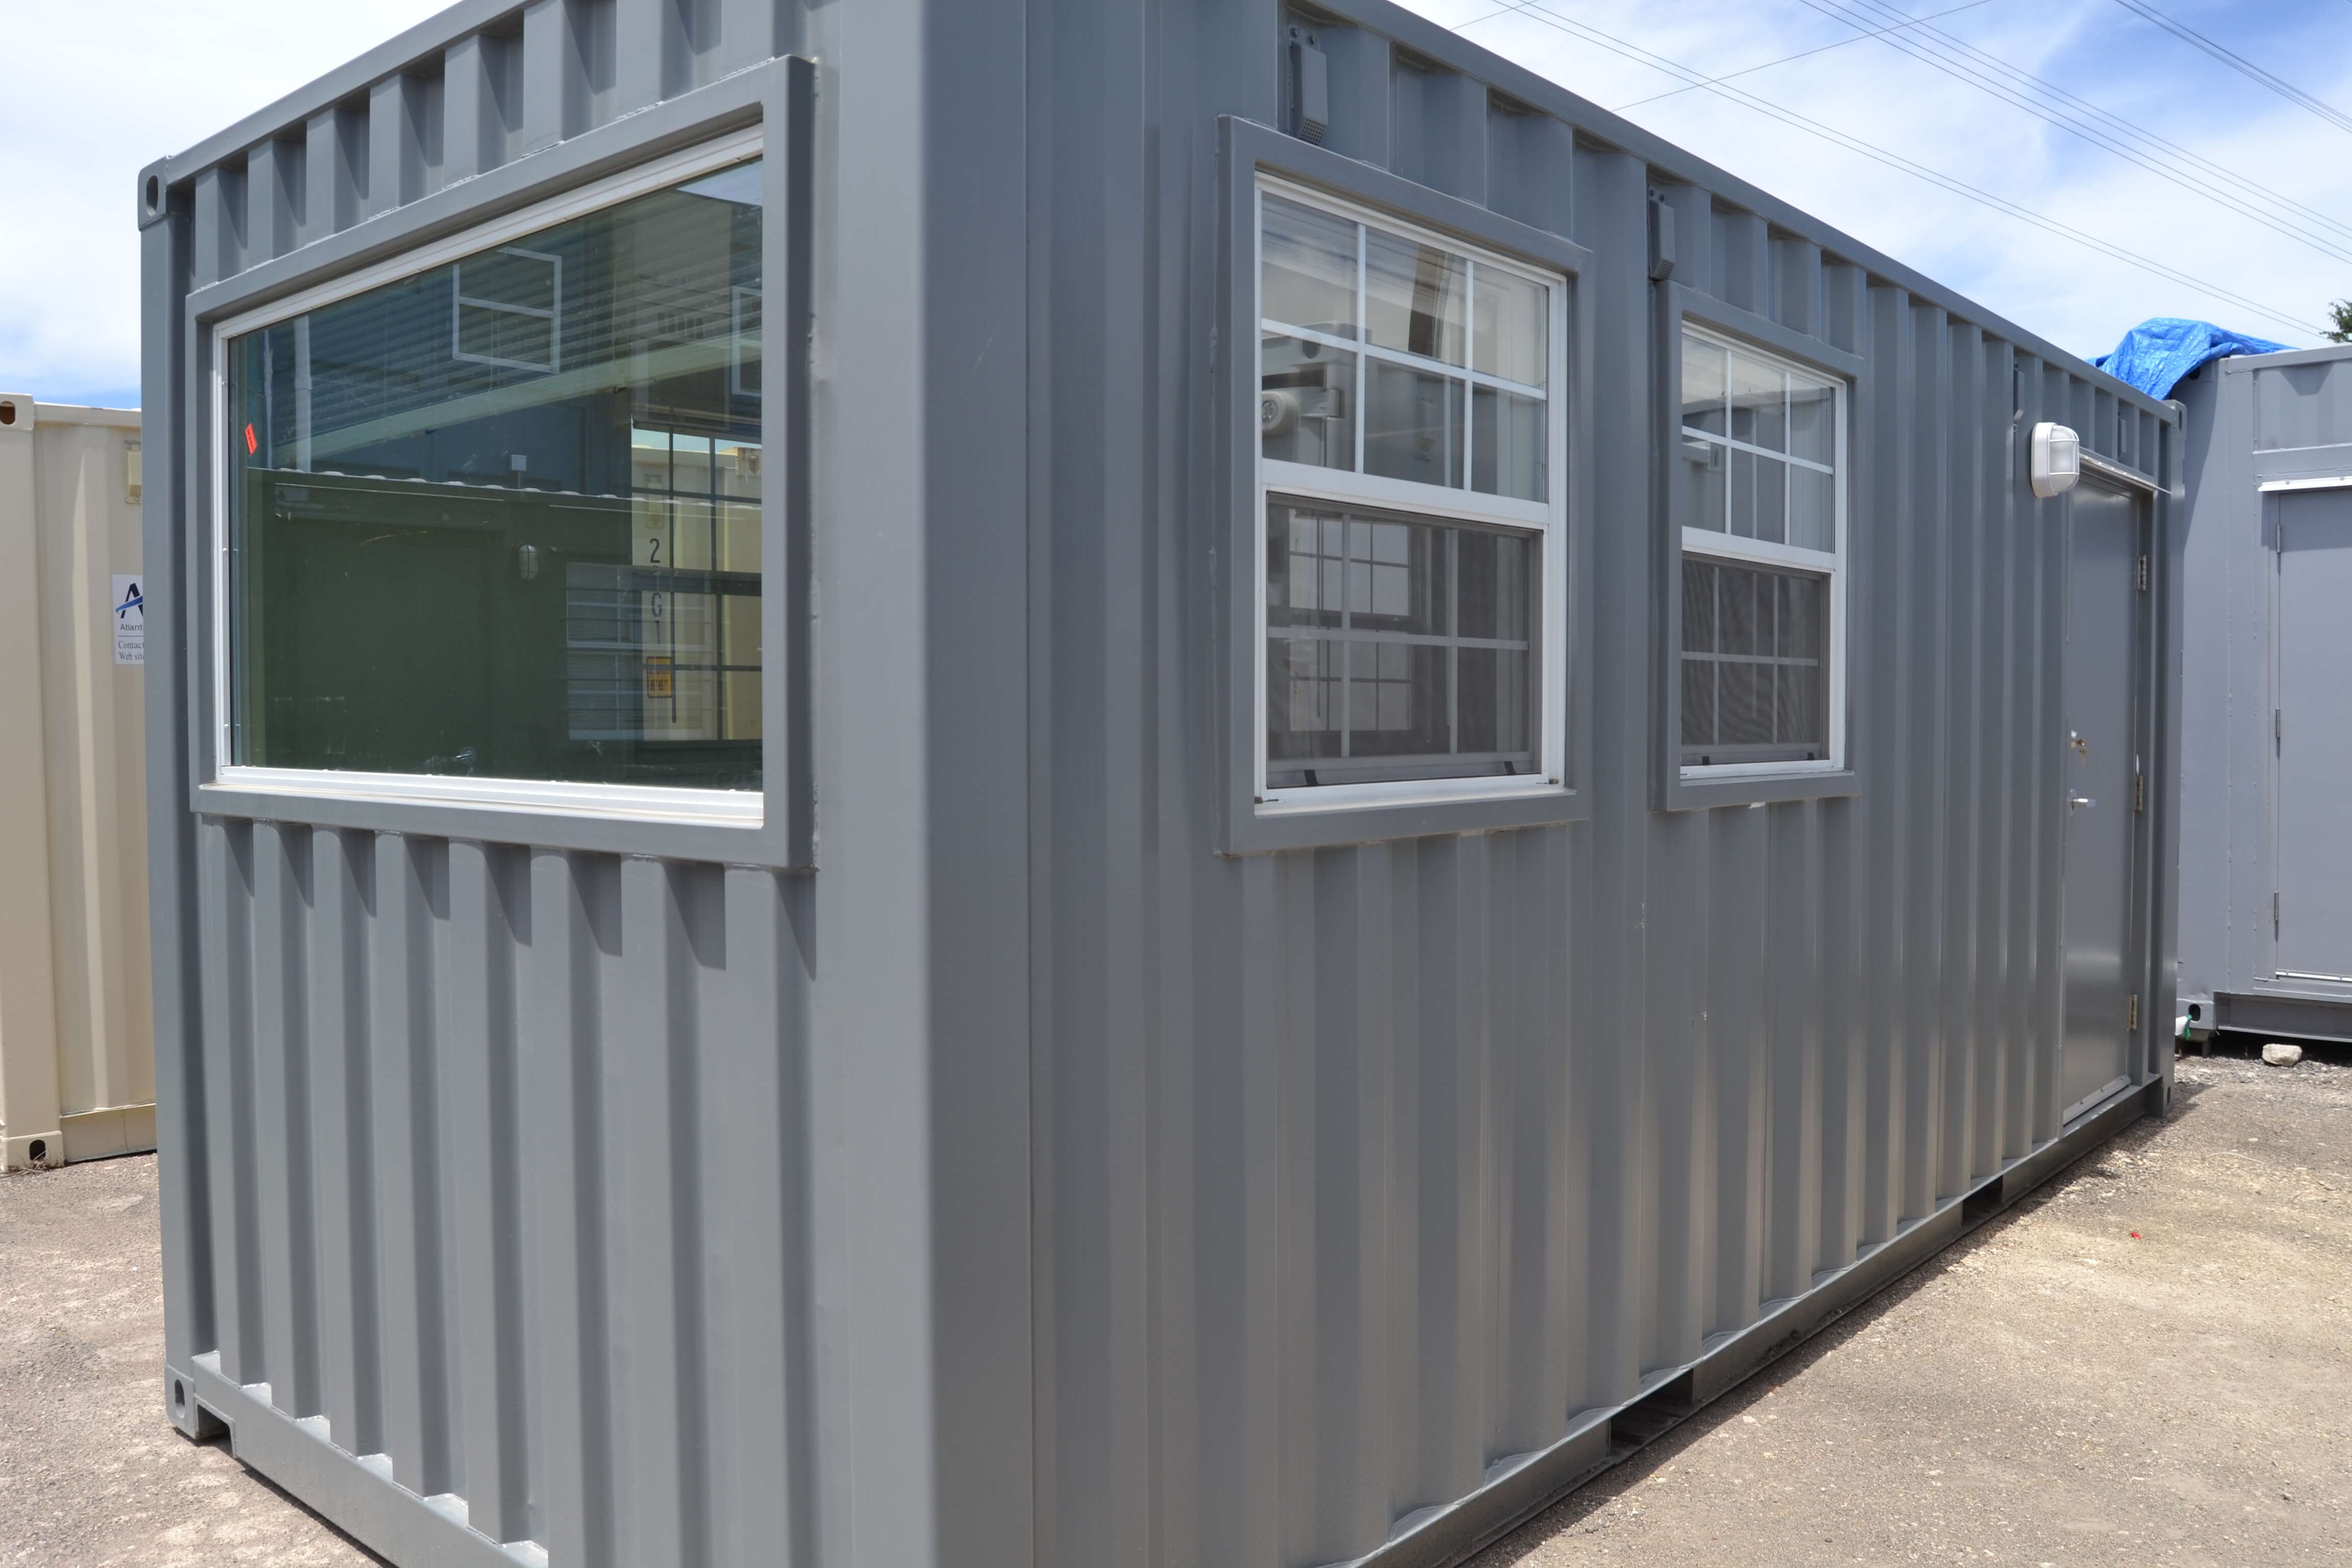 LA County Fire Dept. shipping container Observation Office